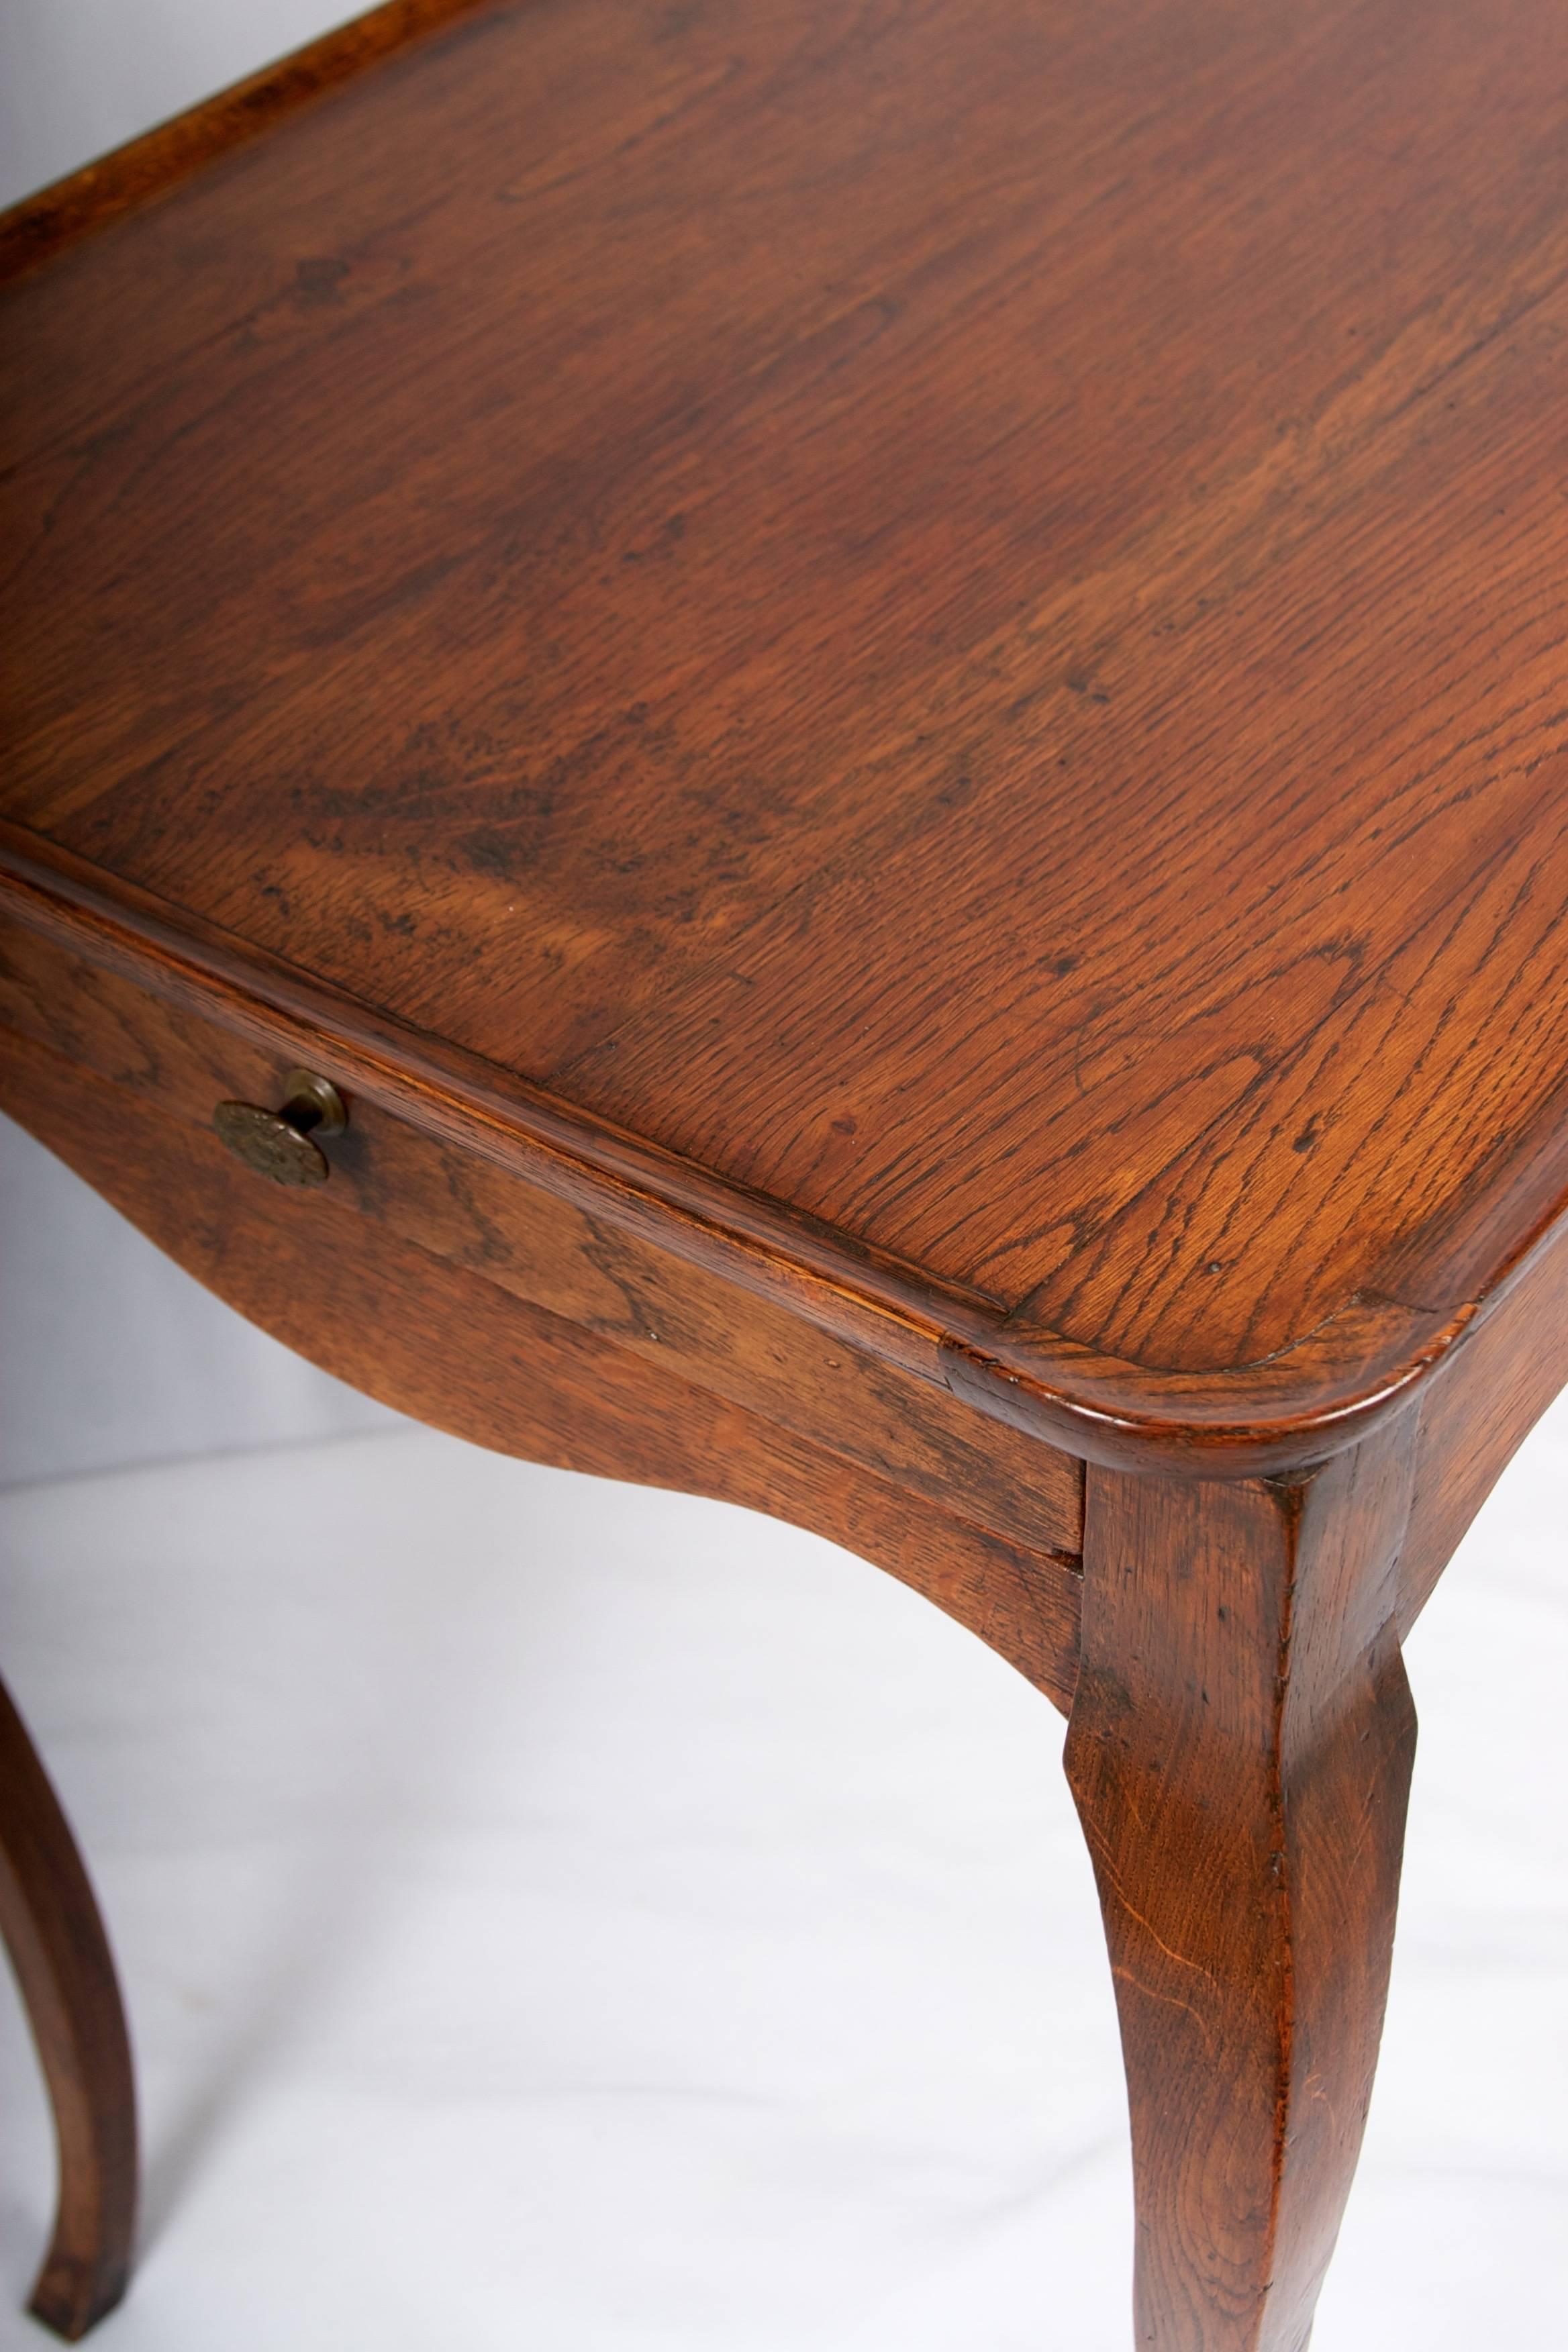 A wonderful solid oak side table with shaped dish top detail, lovely
cabriolet legs and one drawer.